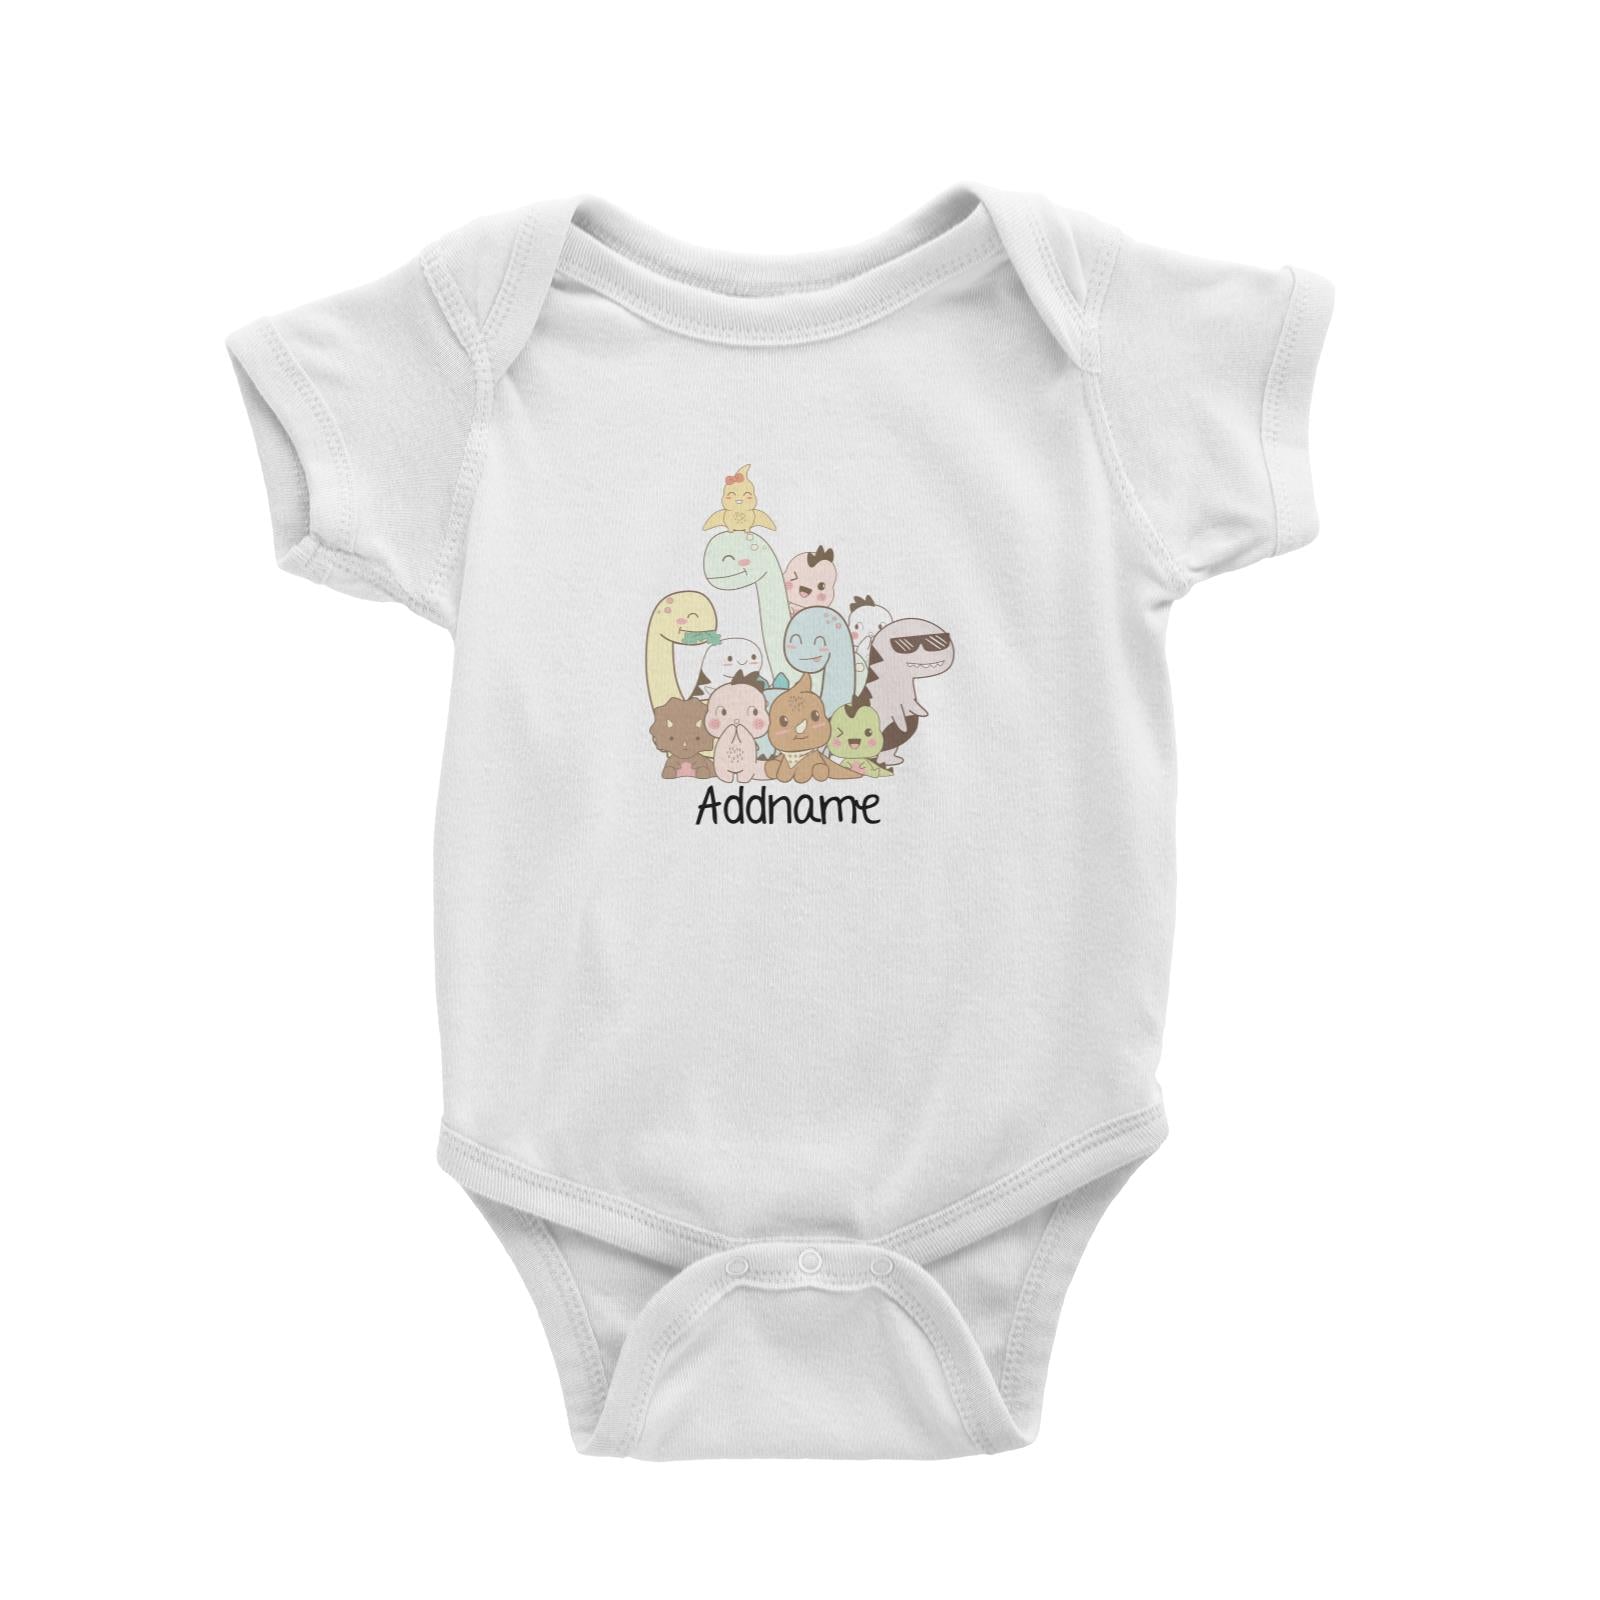 Cute Animals And Friends Series Cute Little Dinosaur Group Addname Baby Romper